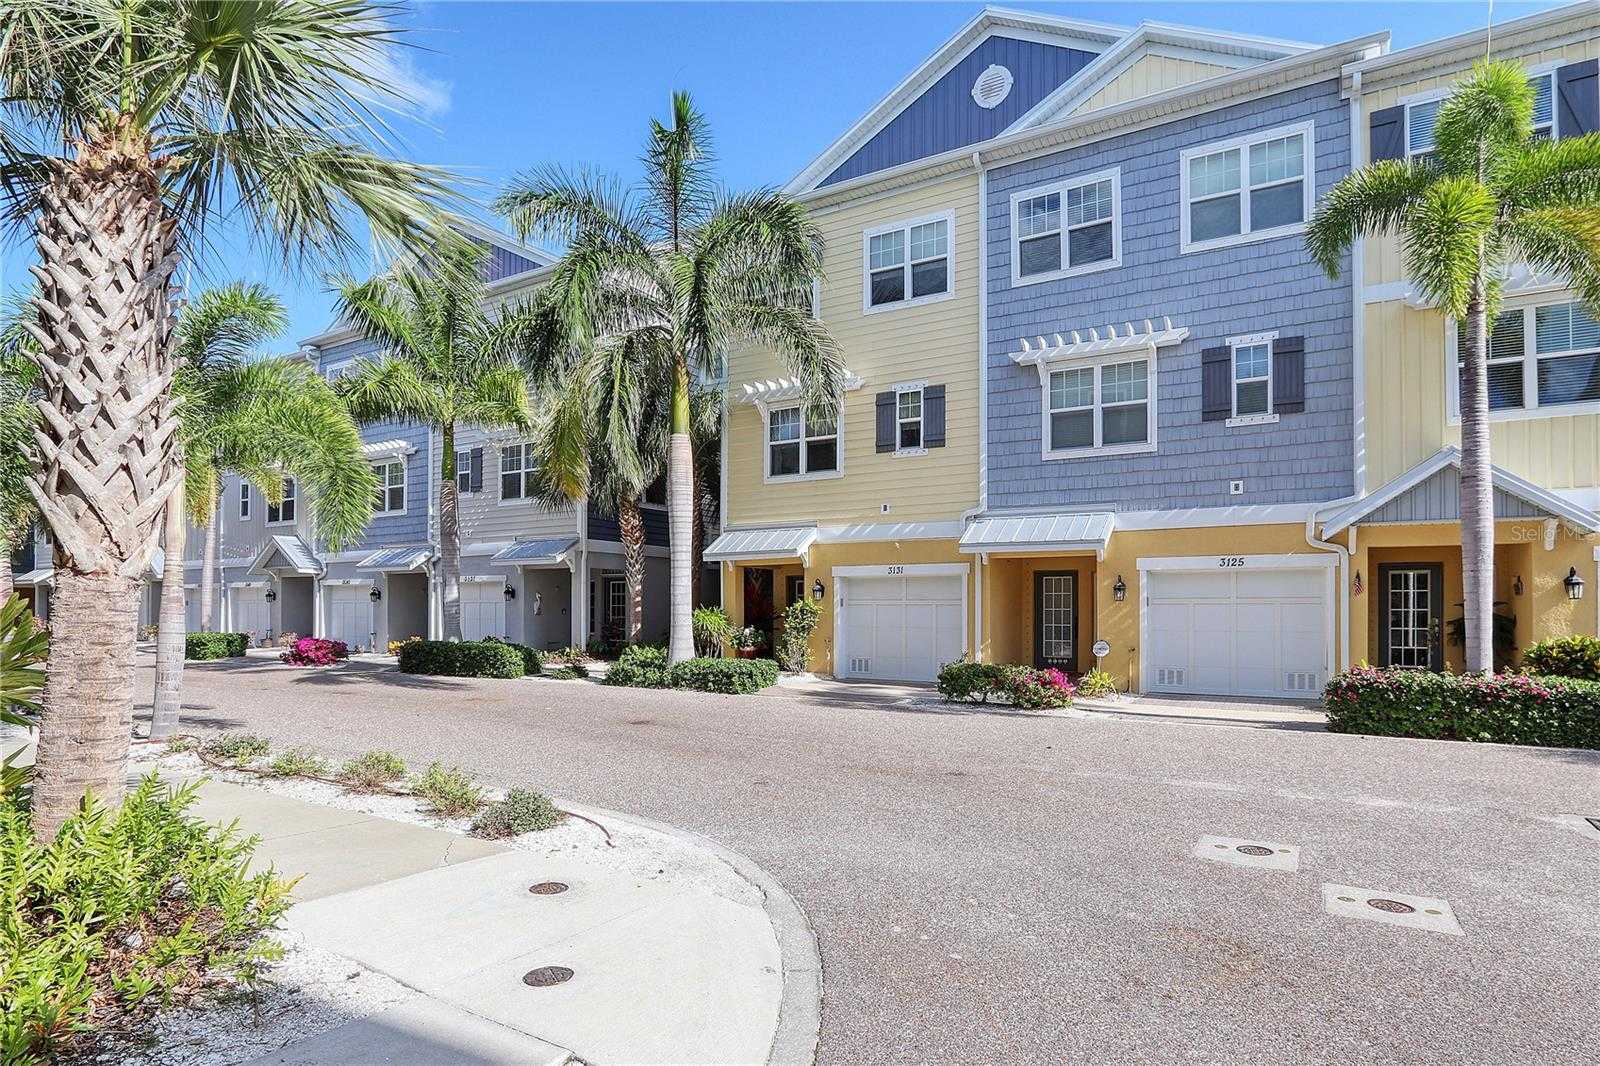 $709,900 - 3Br/3Ba -  for Sale in Cove At Loggerhead, St Petersburg